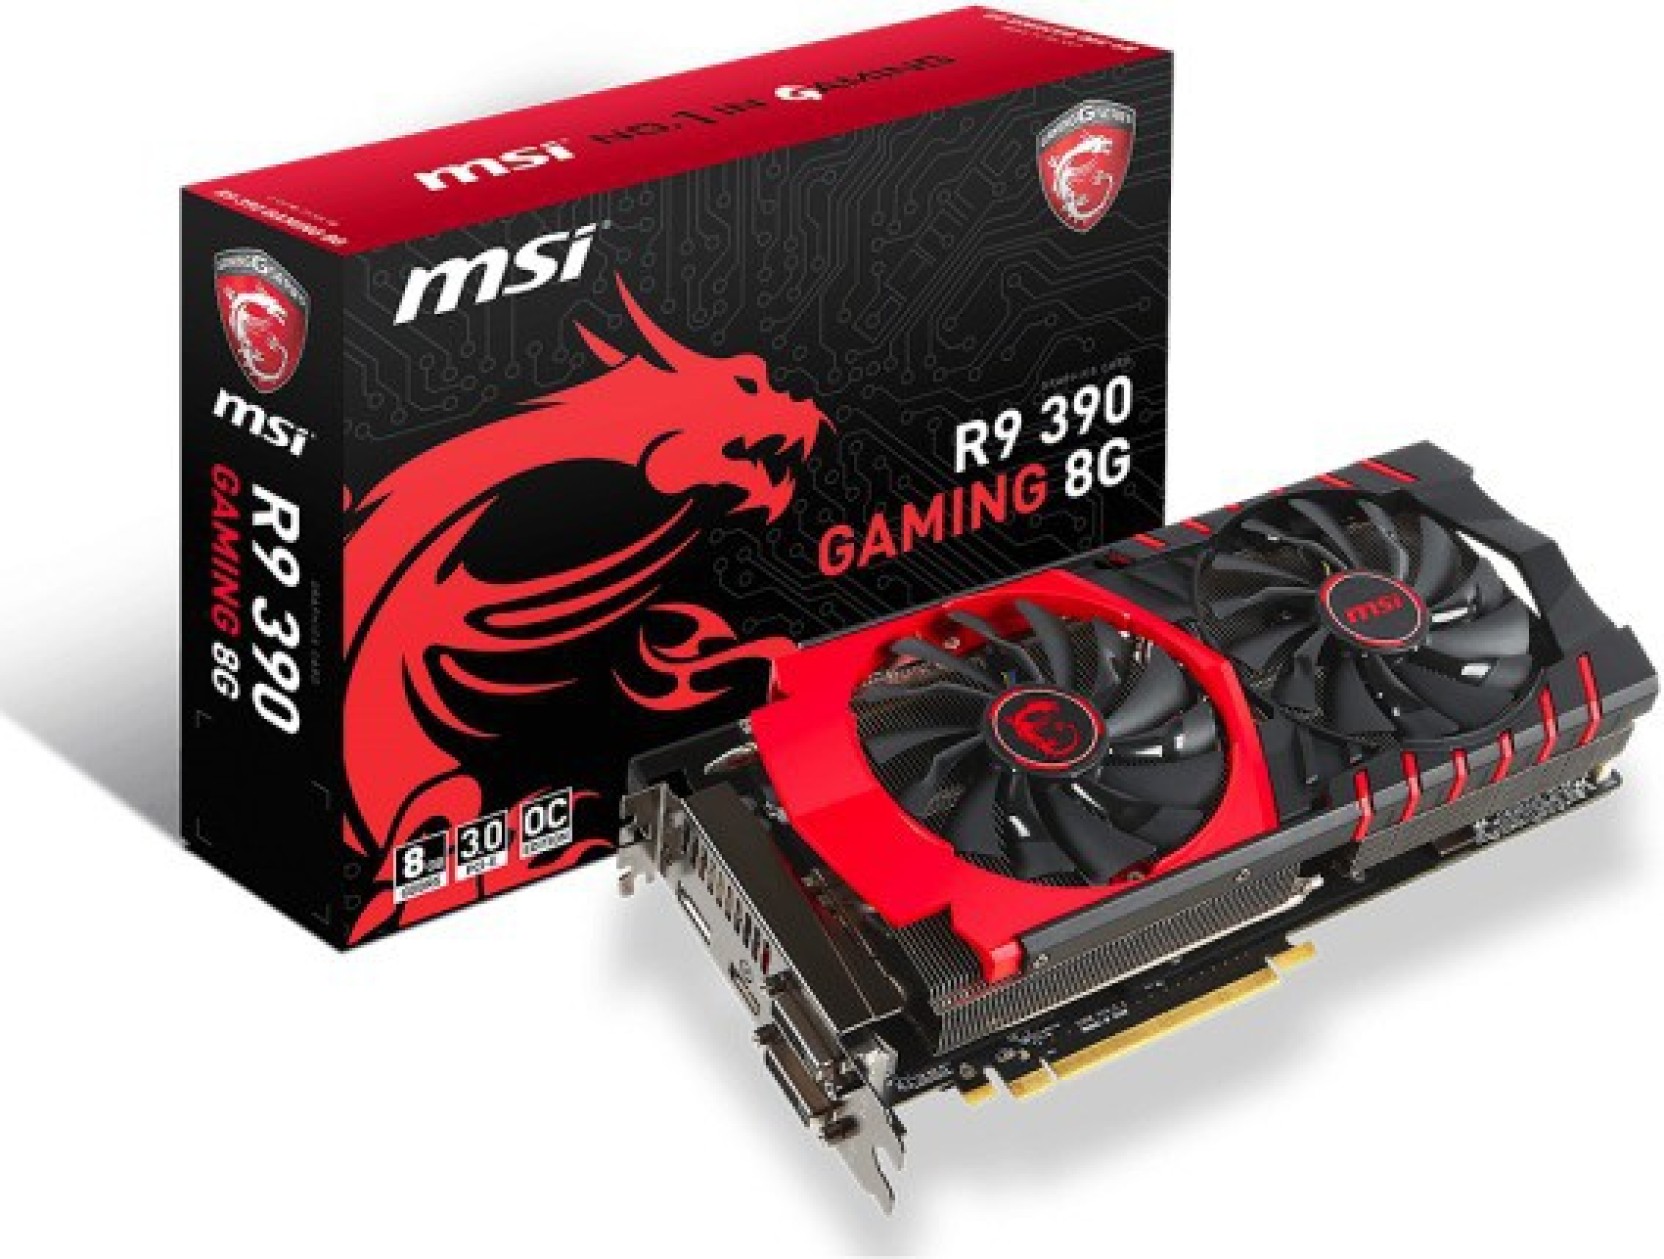 Gaming Pc Graphics Card : Used, ASUS HD7850 1GB DDR5 256bit Gaming Desktop PC ... - Nvidia's geforce gtx 1650 super is the best budget graphics card you can buy for 1080p gaming, and the custom asus rog strix model is loaded with extras for a mere $10 premium.